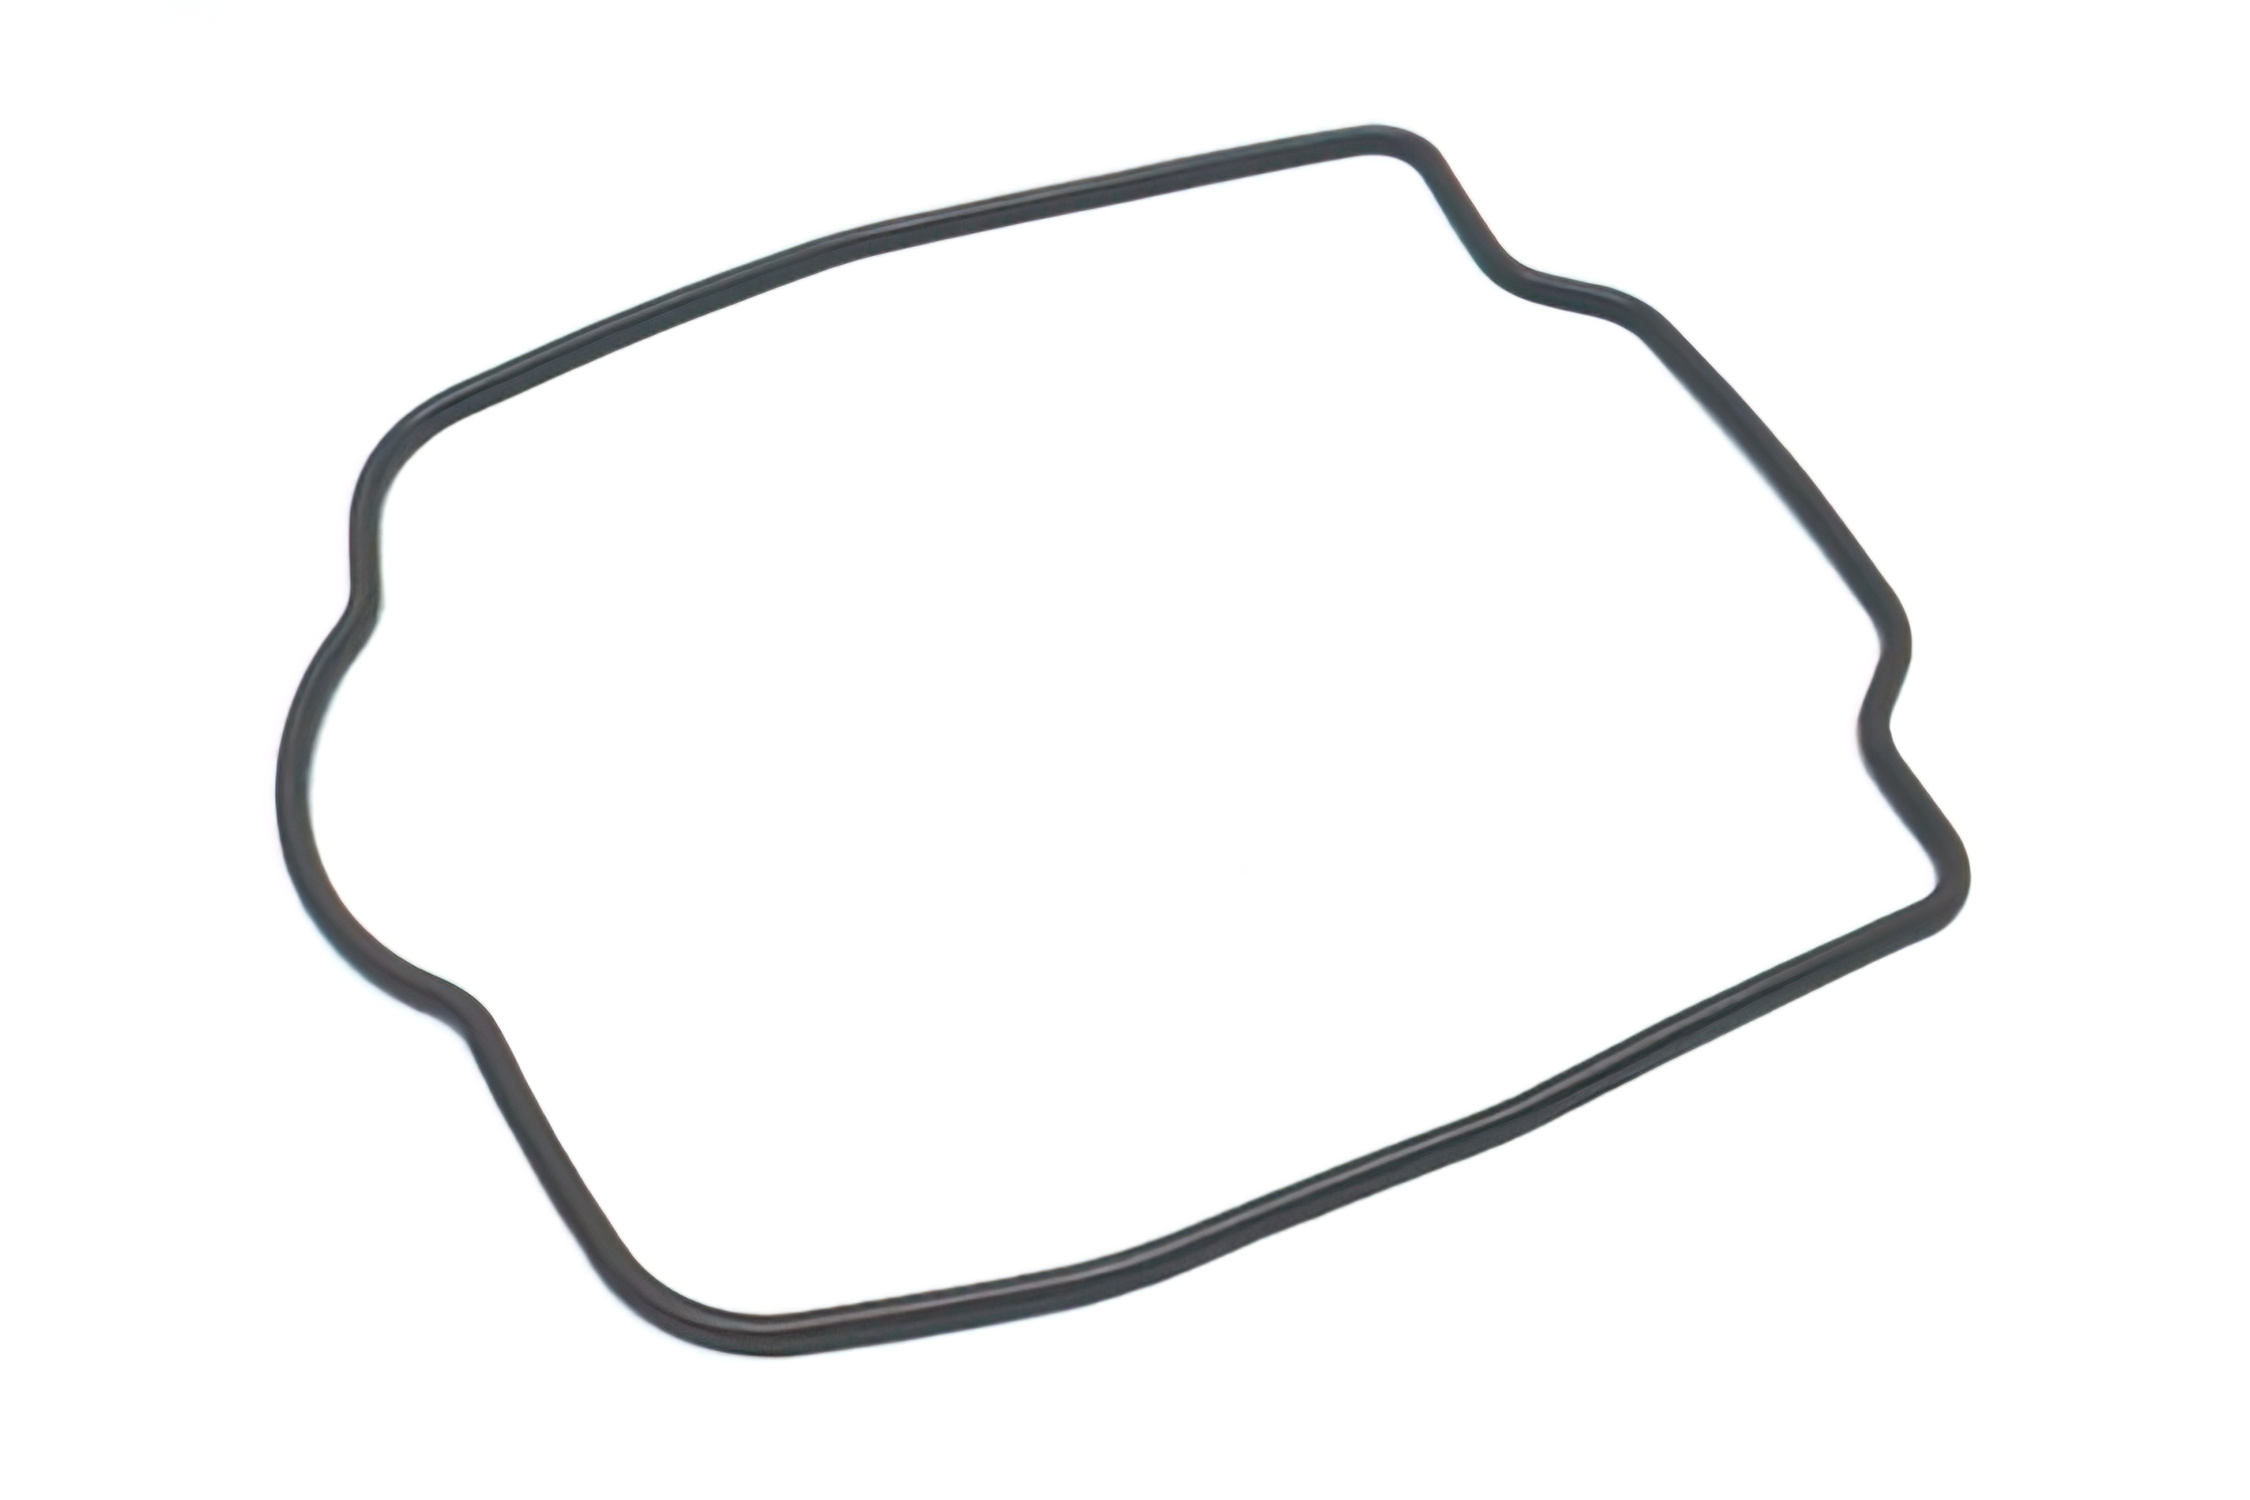 Cylinder Head Cover Gasket Piaggio for Vespa LX 125 150cc MAXISCOOT